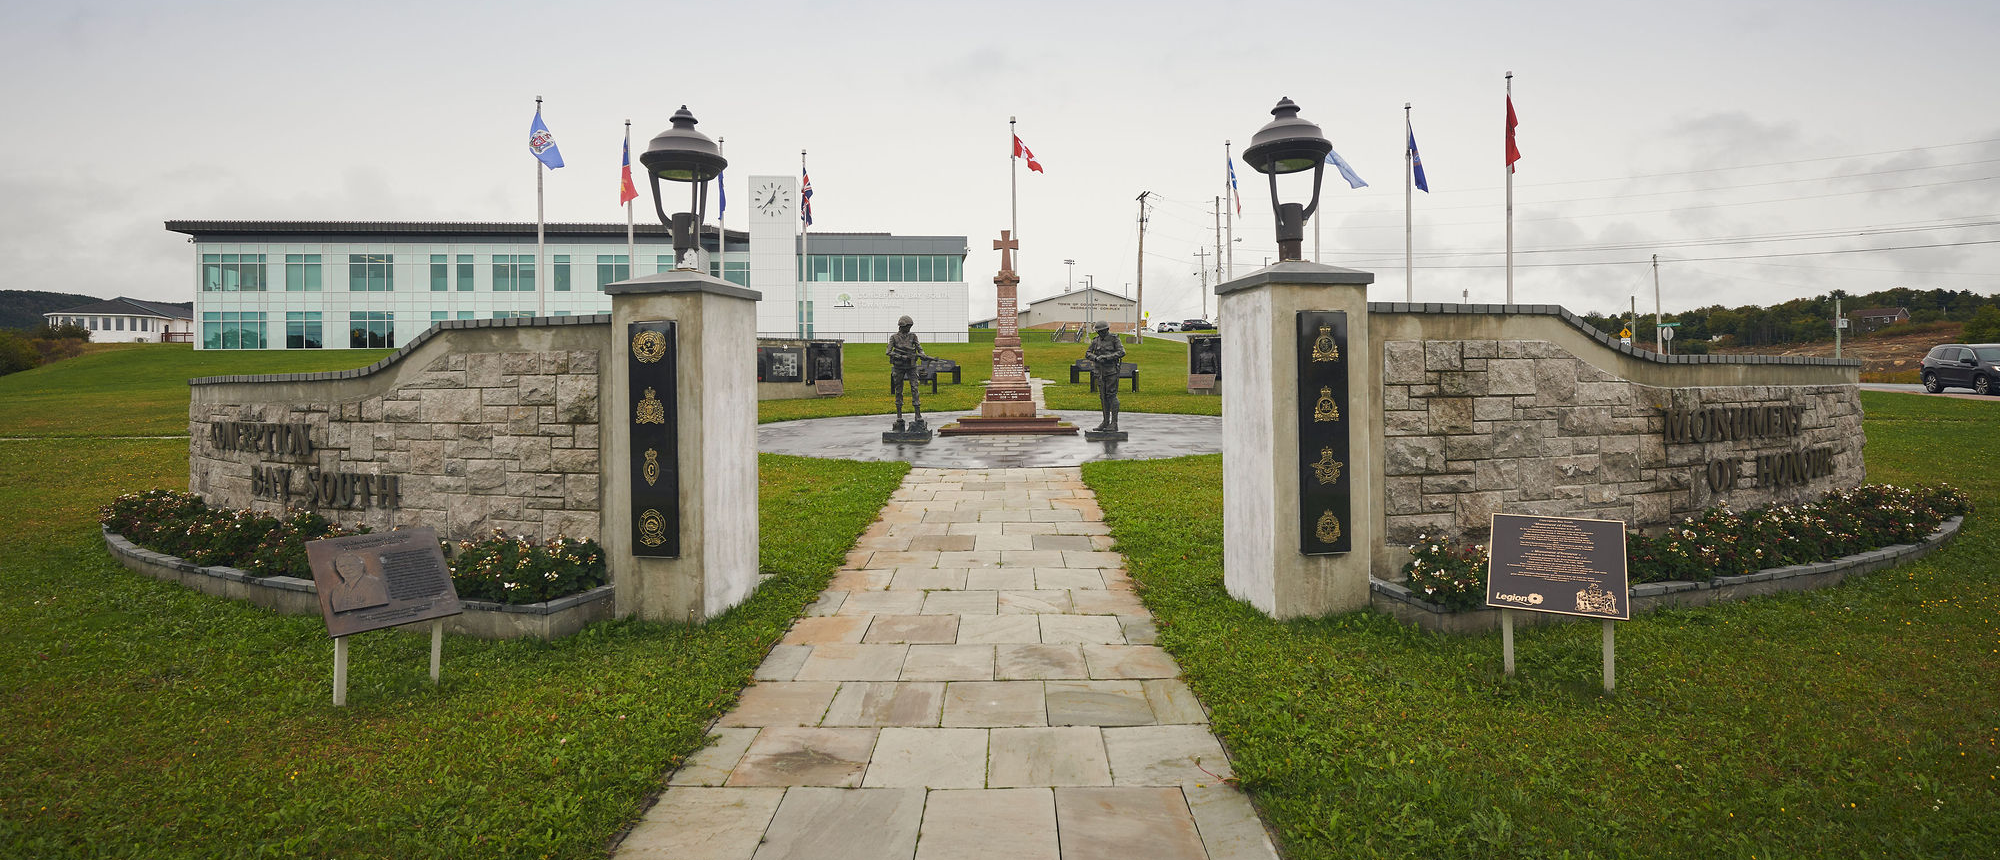 Conception Bay South Monument of Honour